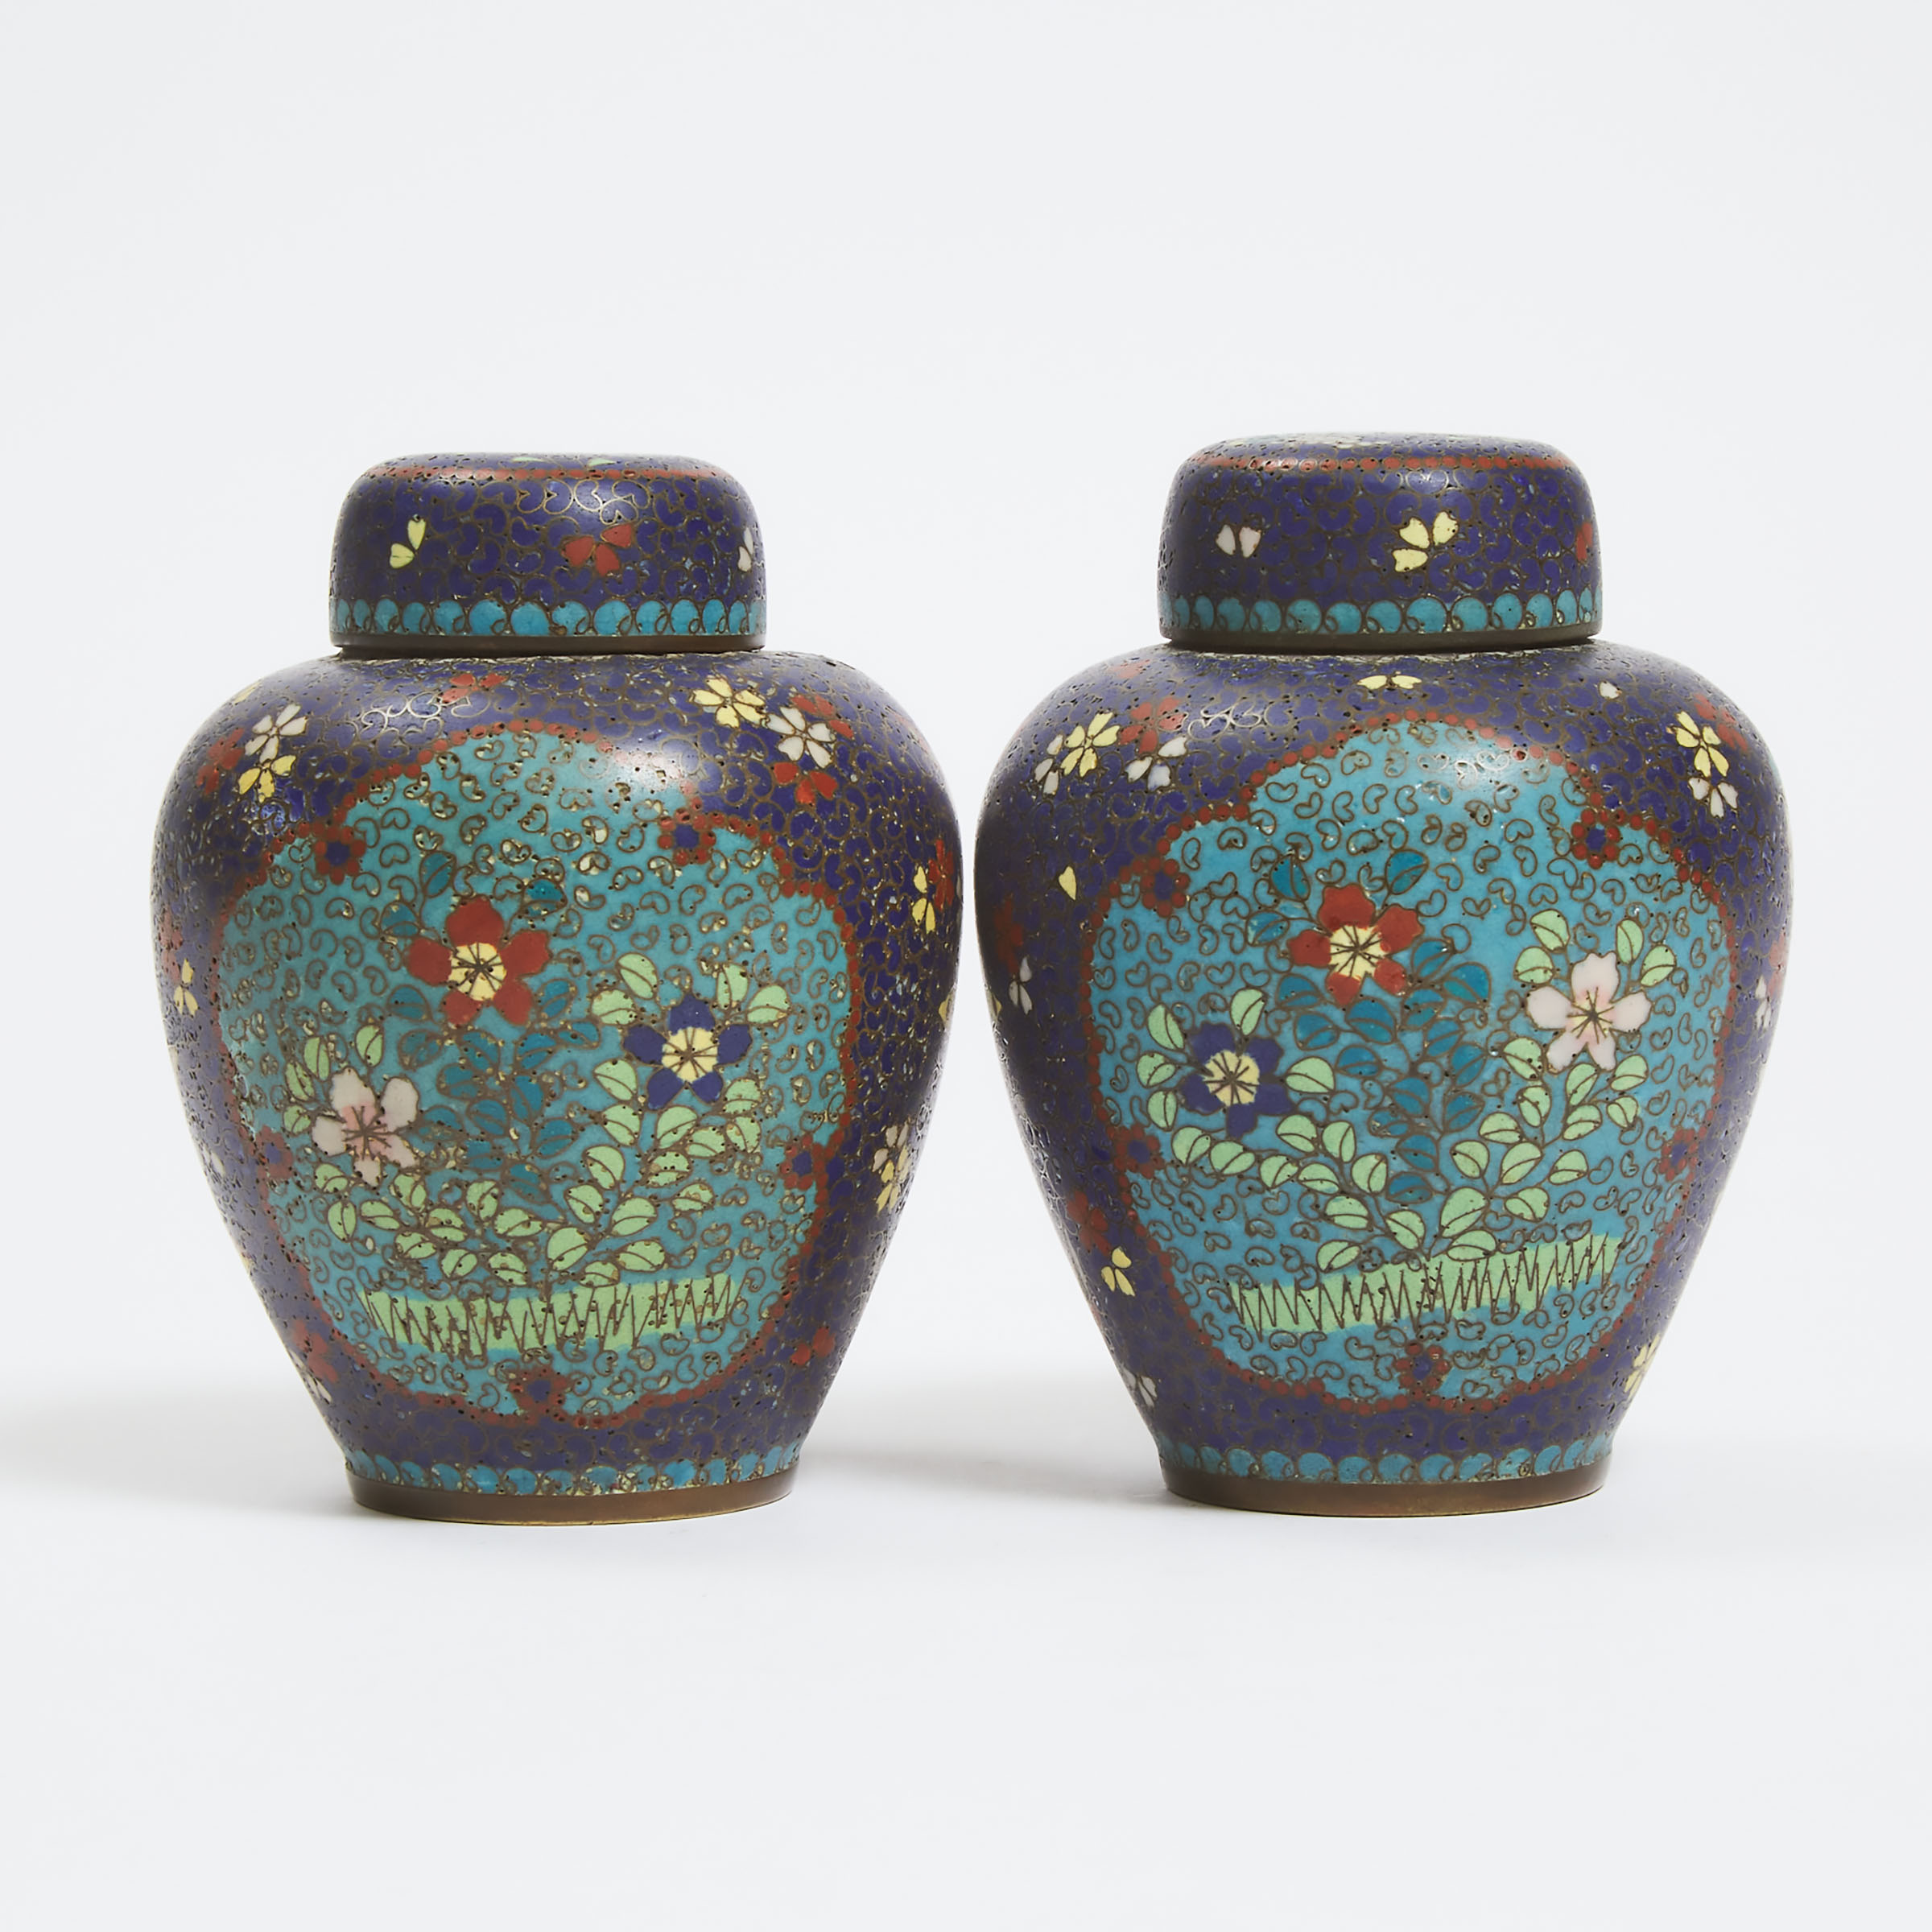 A Pair of Chinese Cloisonné Lidded